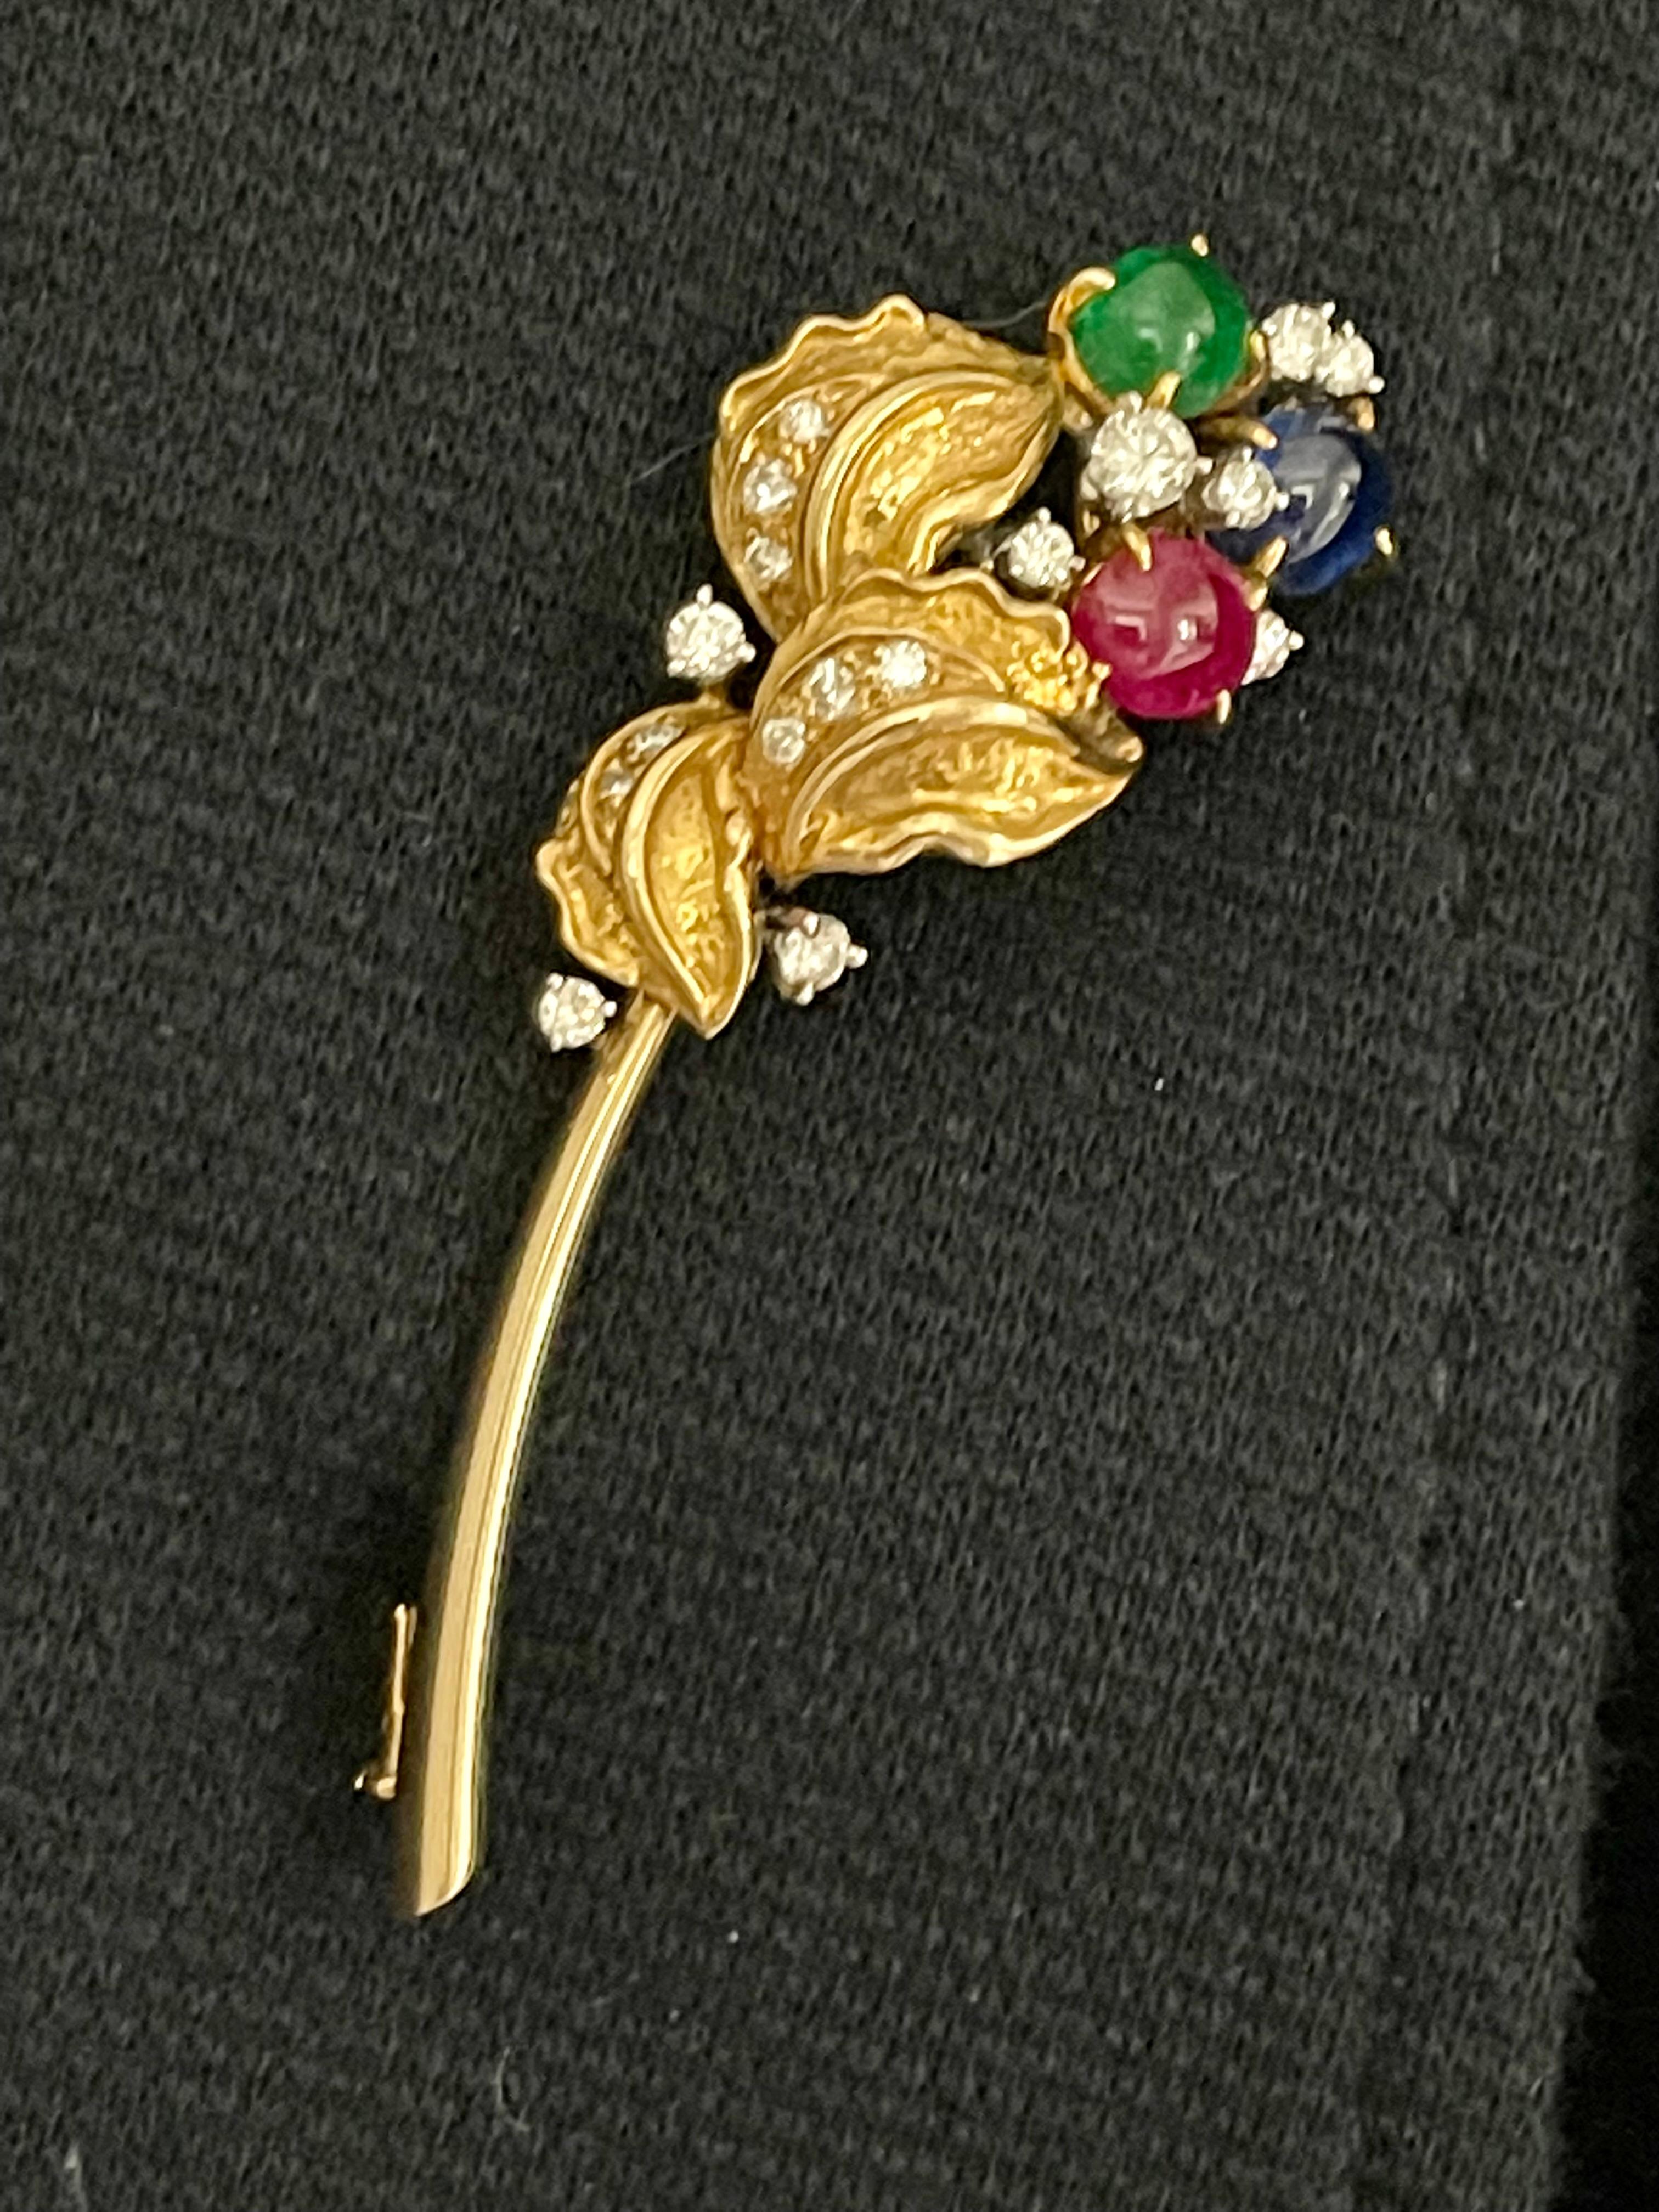 Very elegant floral stlye brooch in 18 K yellow Gold made by internationally  well-known swiss jeweller Meister Zurich. The brooch festures 3 top quality colored stones like Emerald, Ruby and Sapphire. It is very rare to find this intense and deep